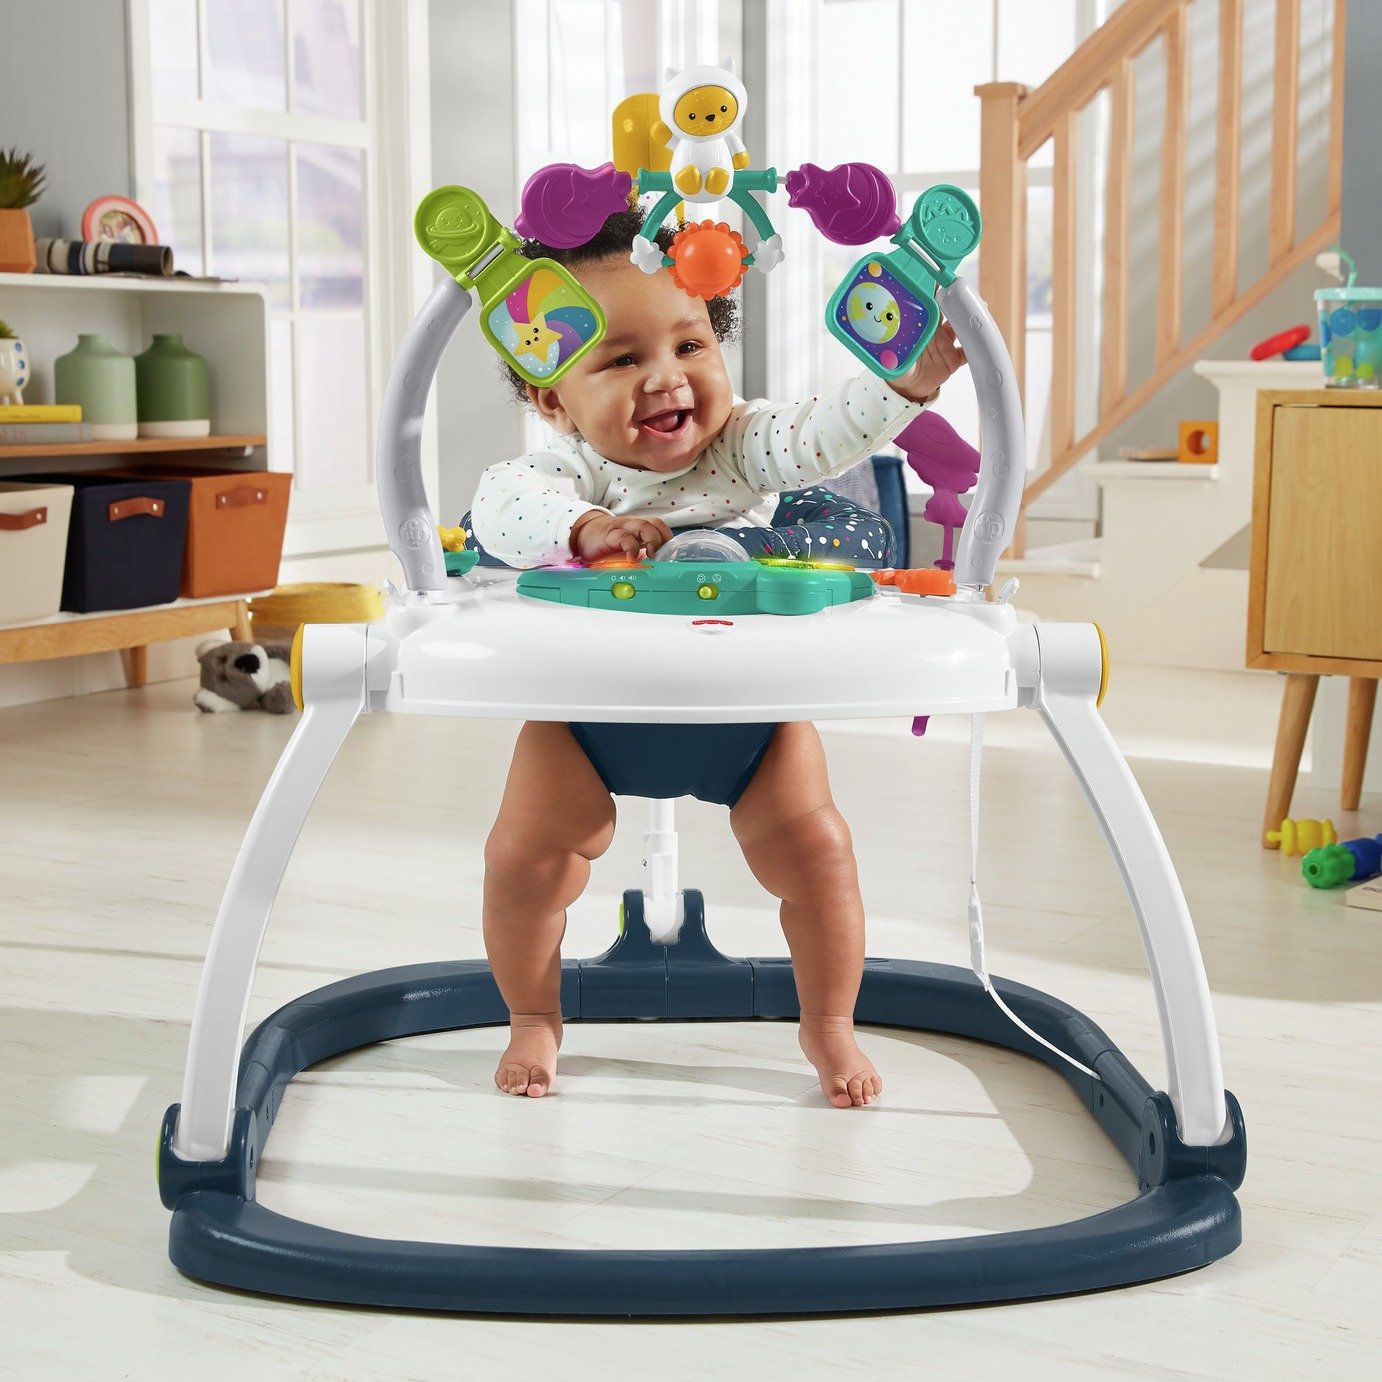 Fisher-Price Astro Kitty SpaceSaver Jumperoo Activity Center review